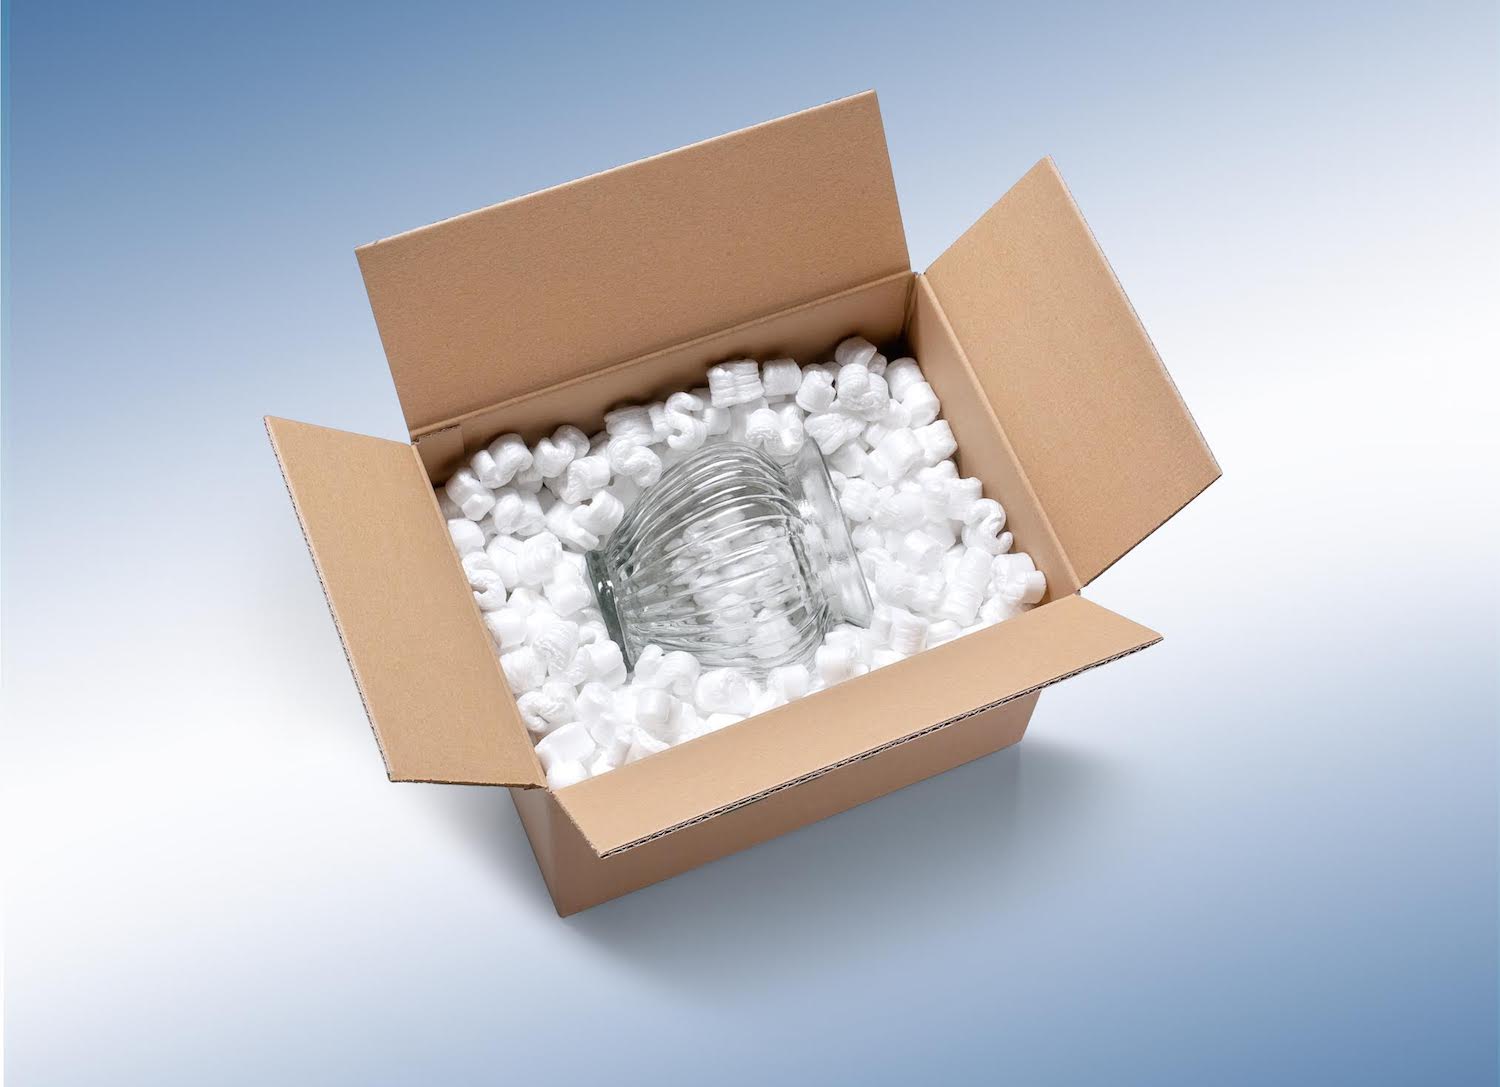 Consider How Packaging Fill Impacts Box Dimensions